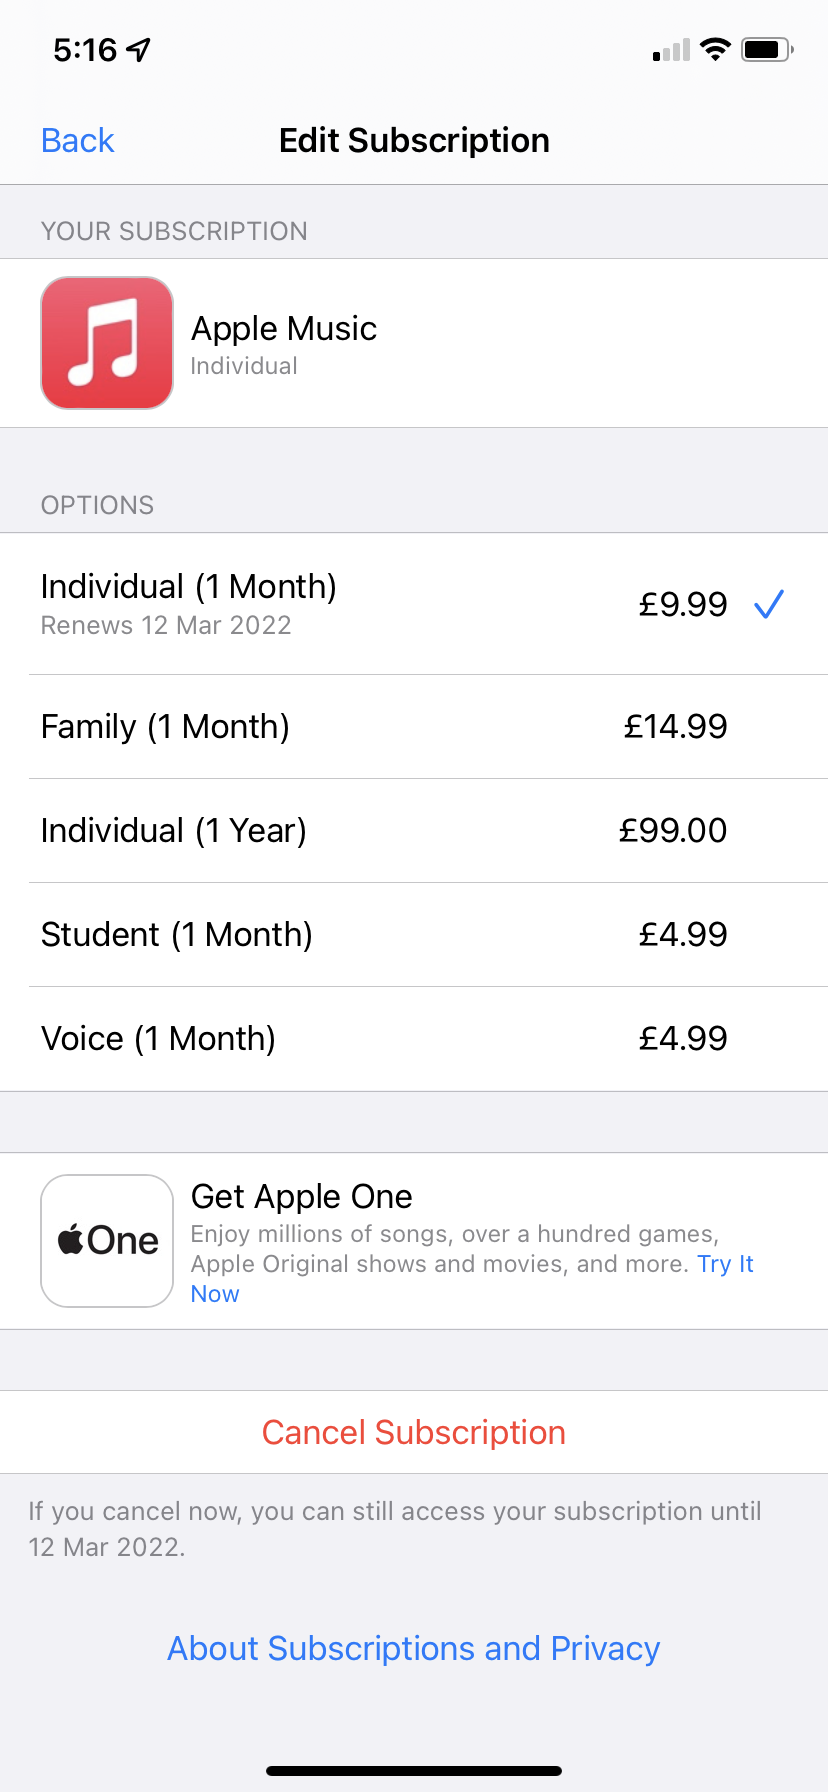 How to switch subscription type on iPhone step 4